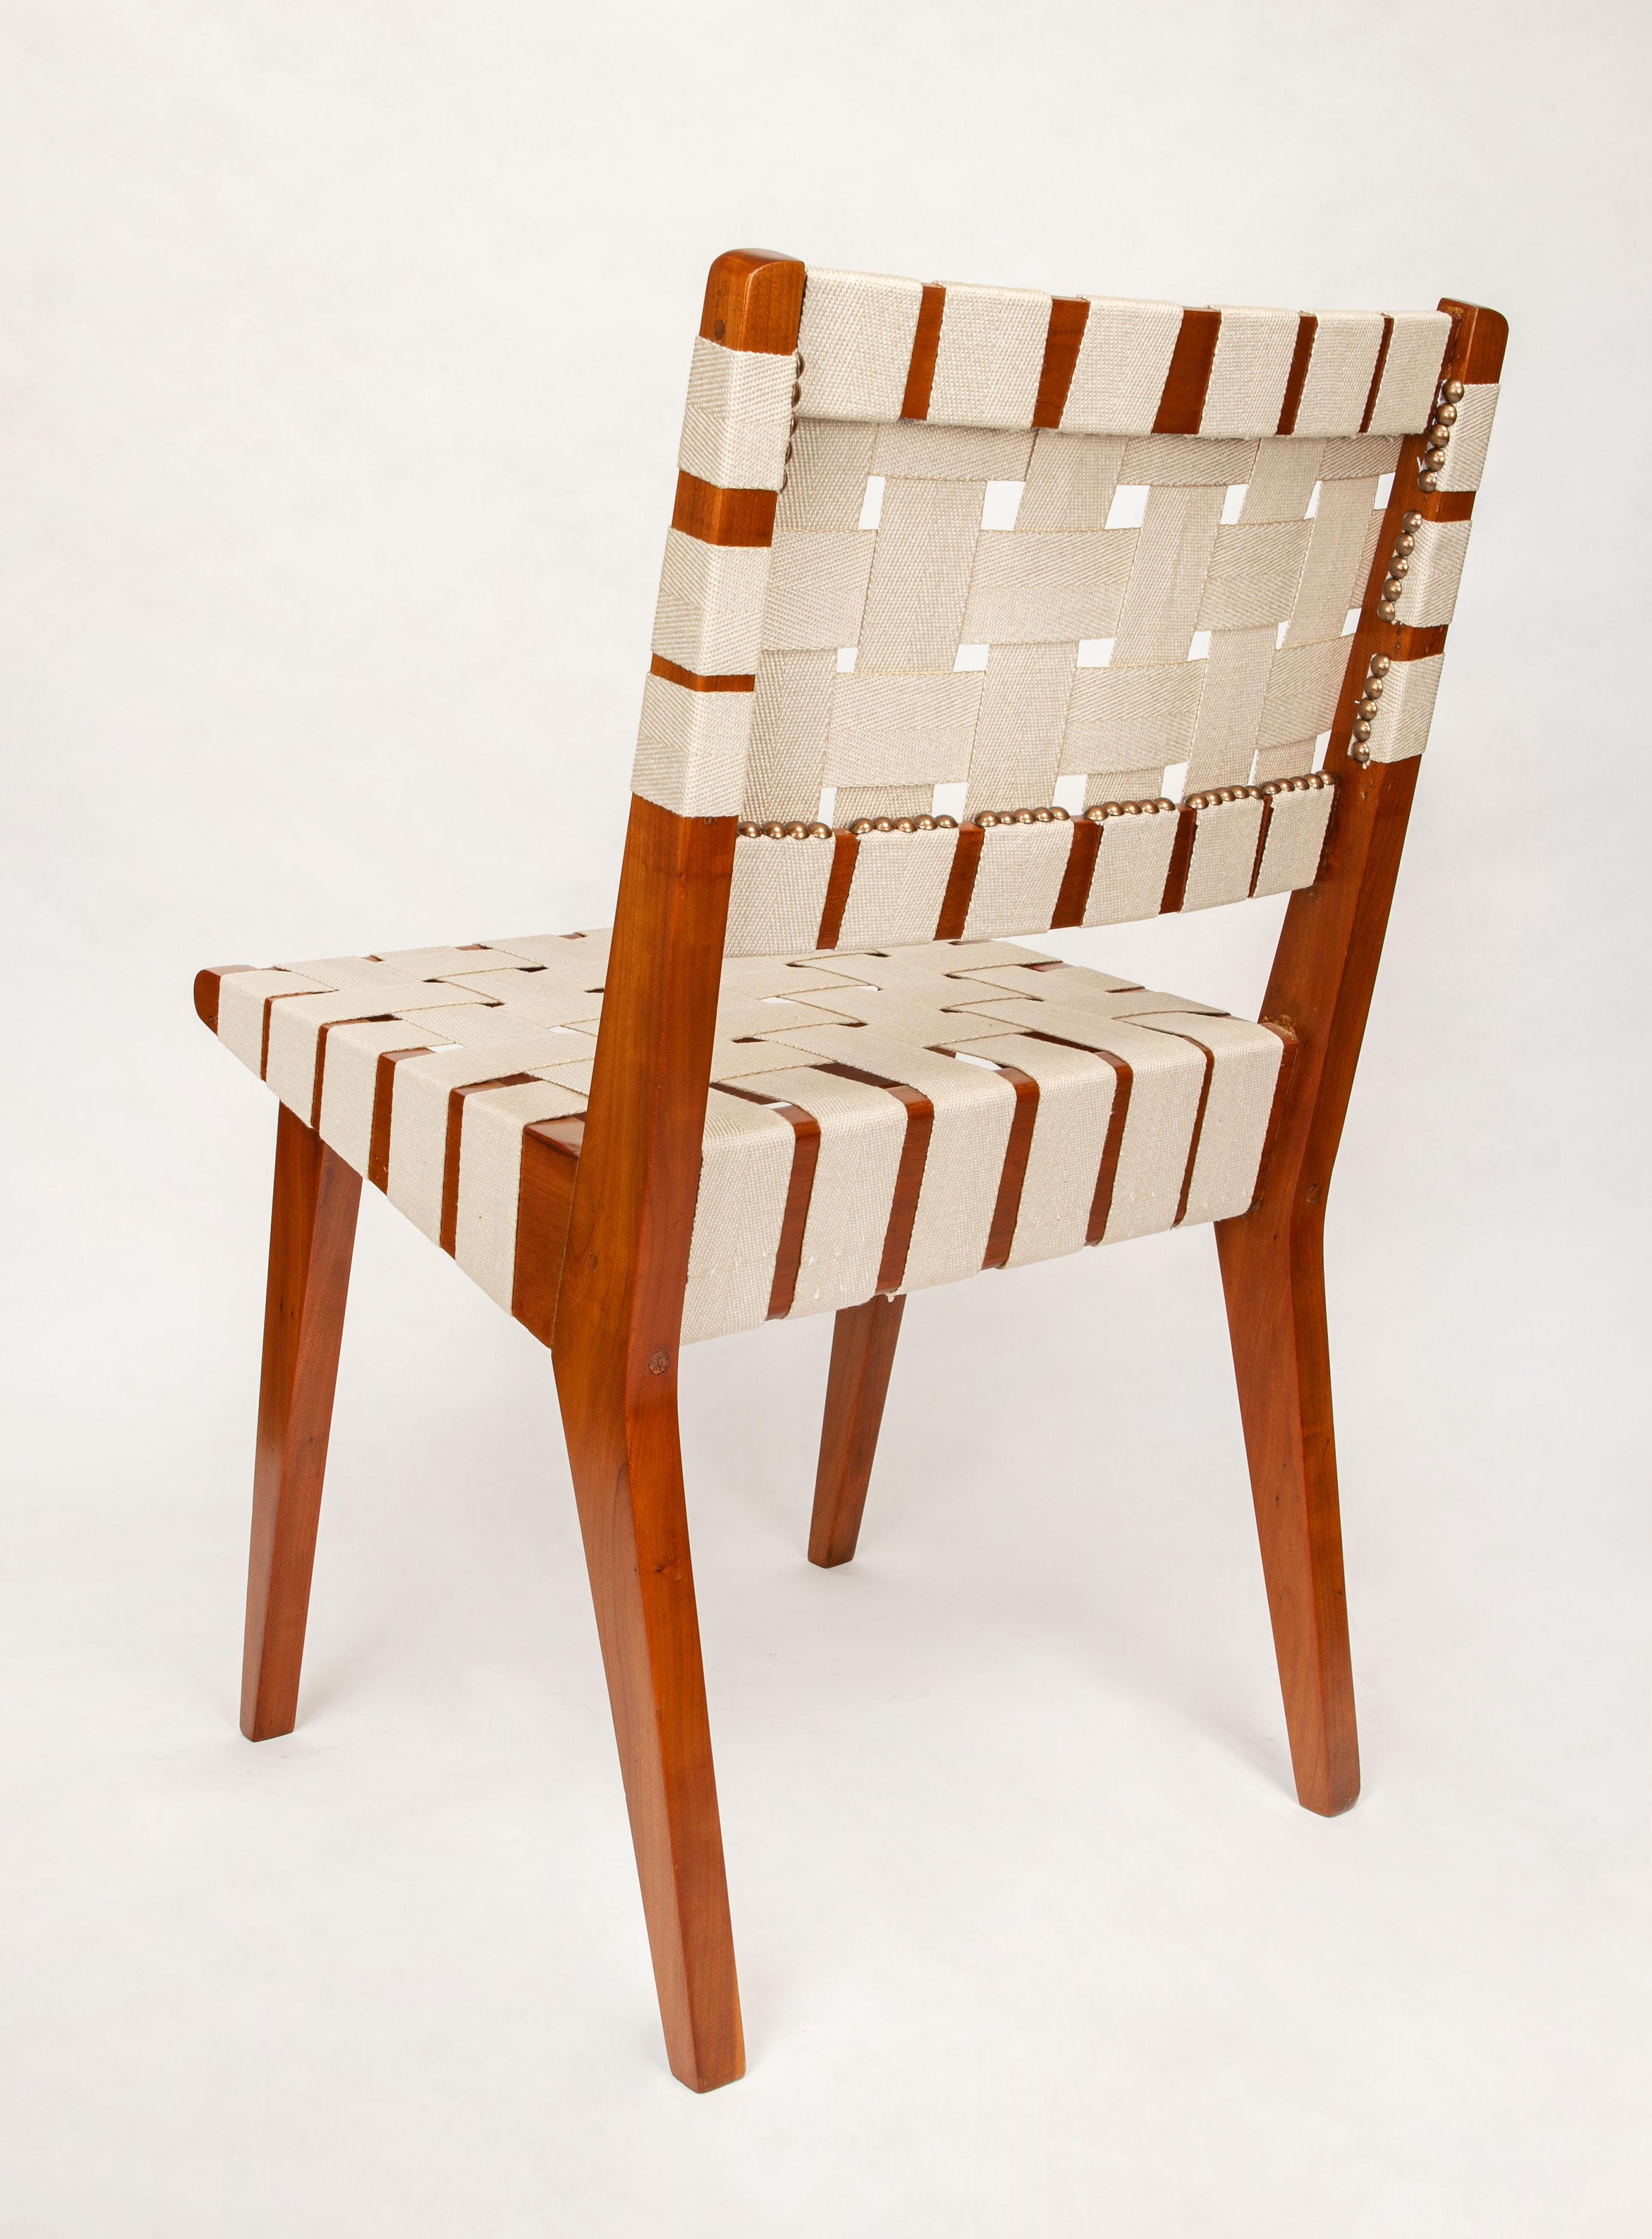 Hand-Woven Classic Jens Risom for Knoll Midcentury Woven Side Chairs, Pair For Sale